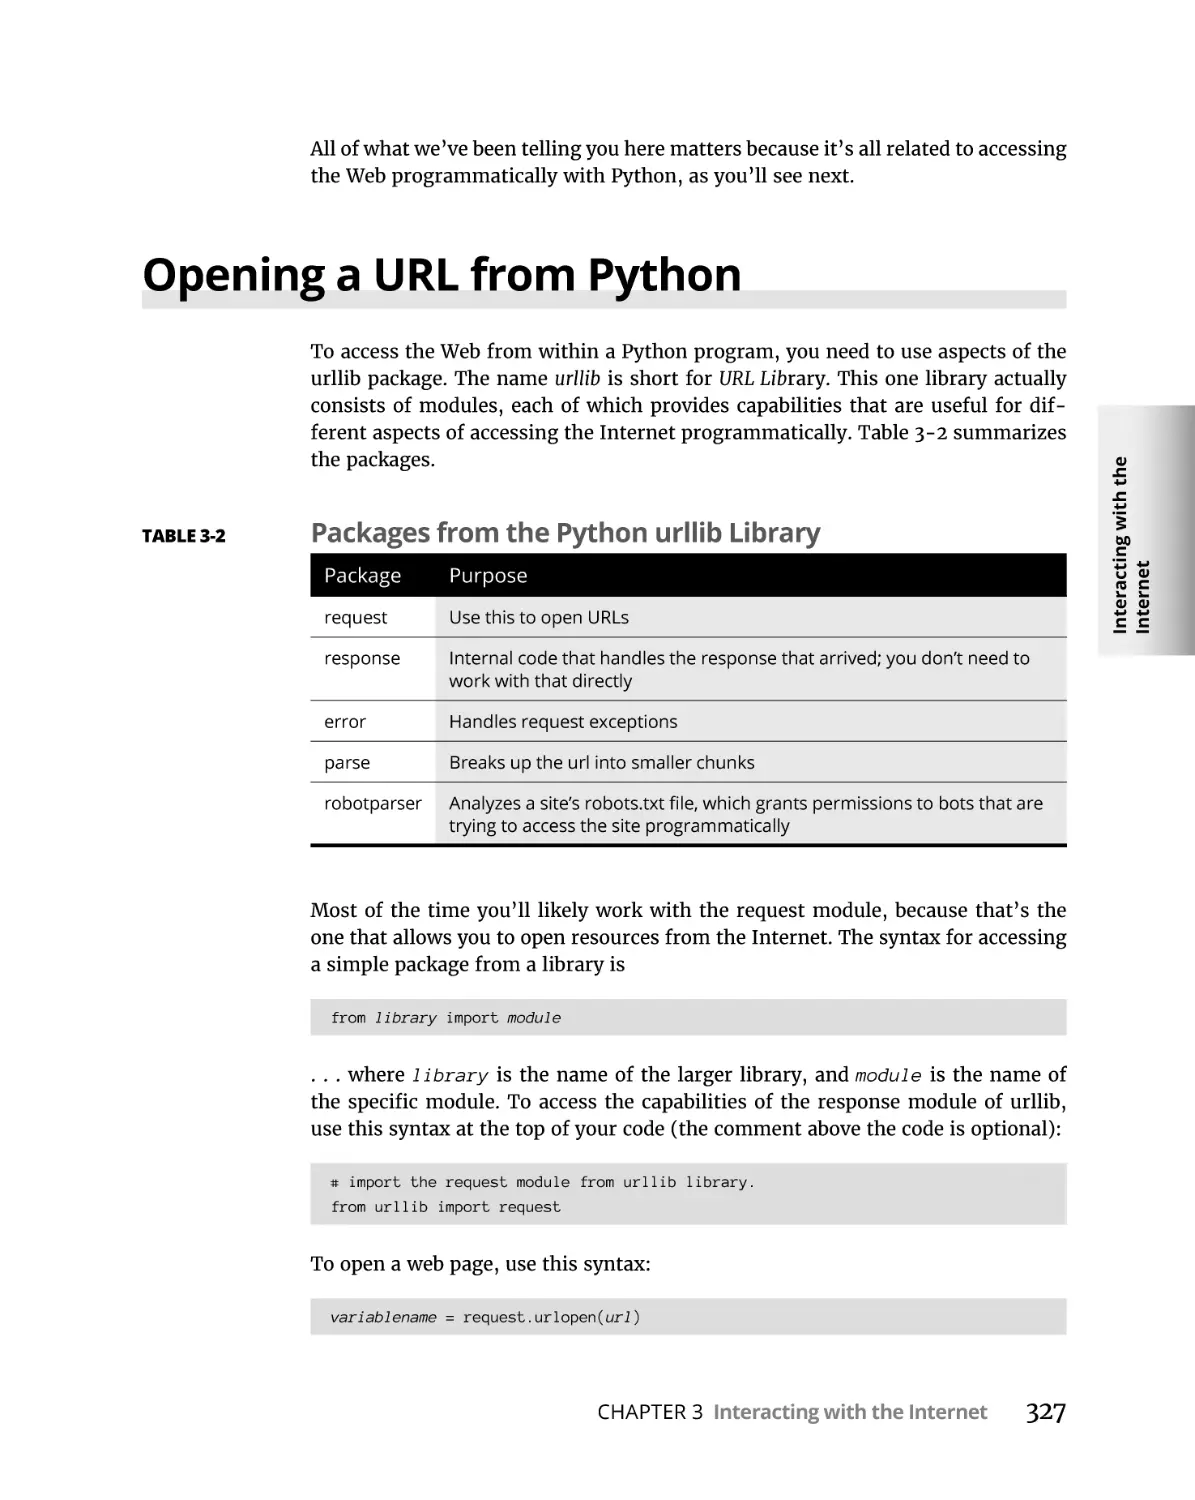 Opening a URL from Python